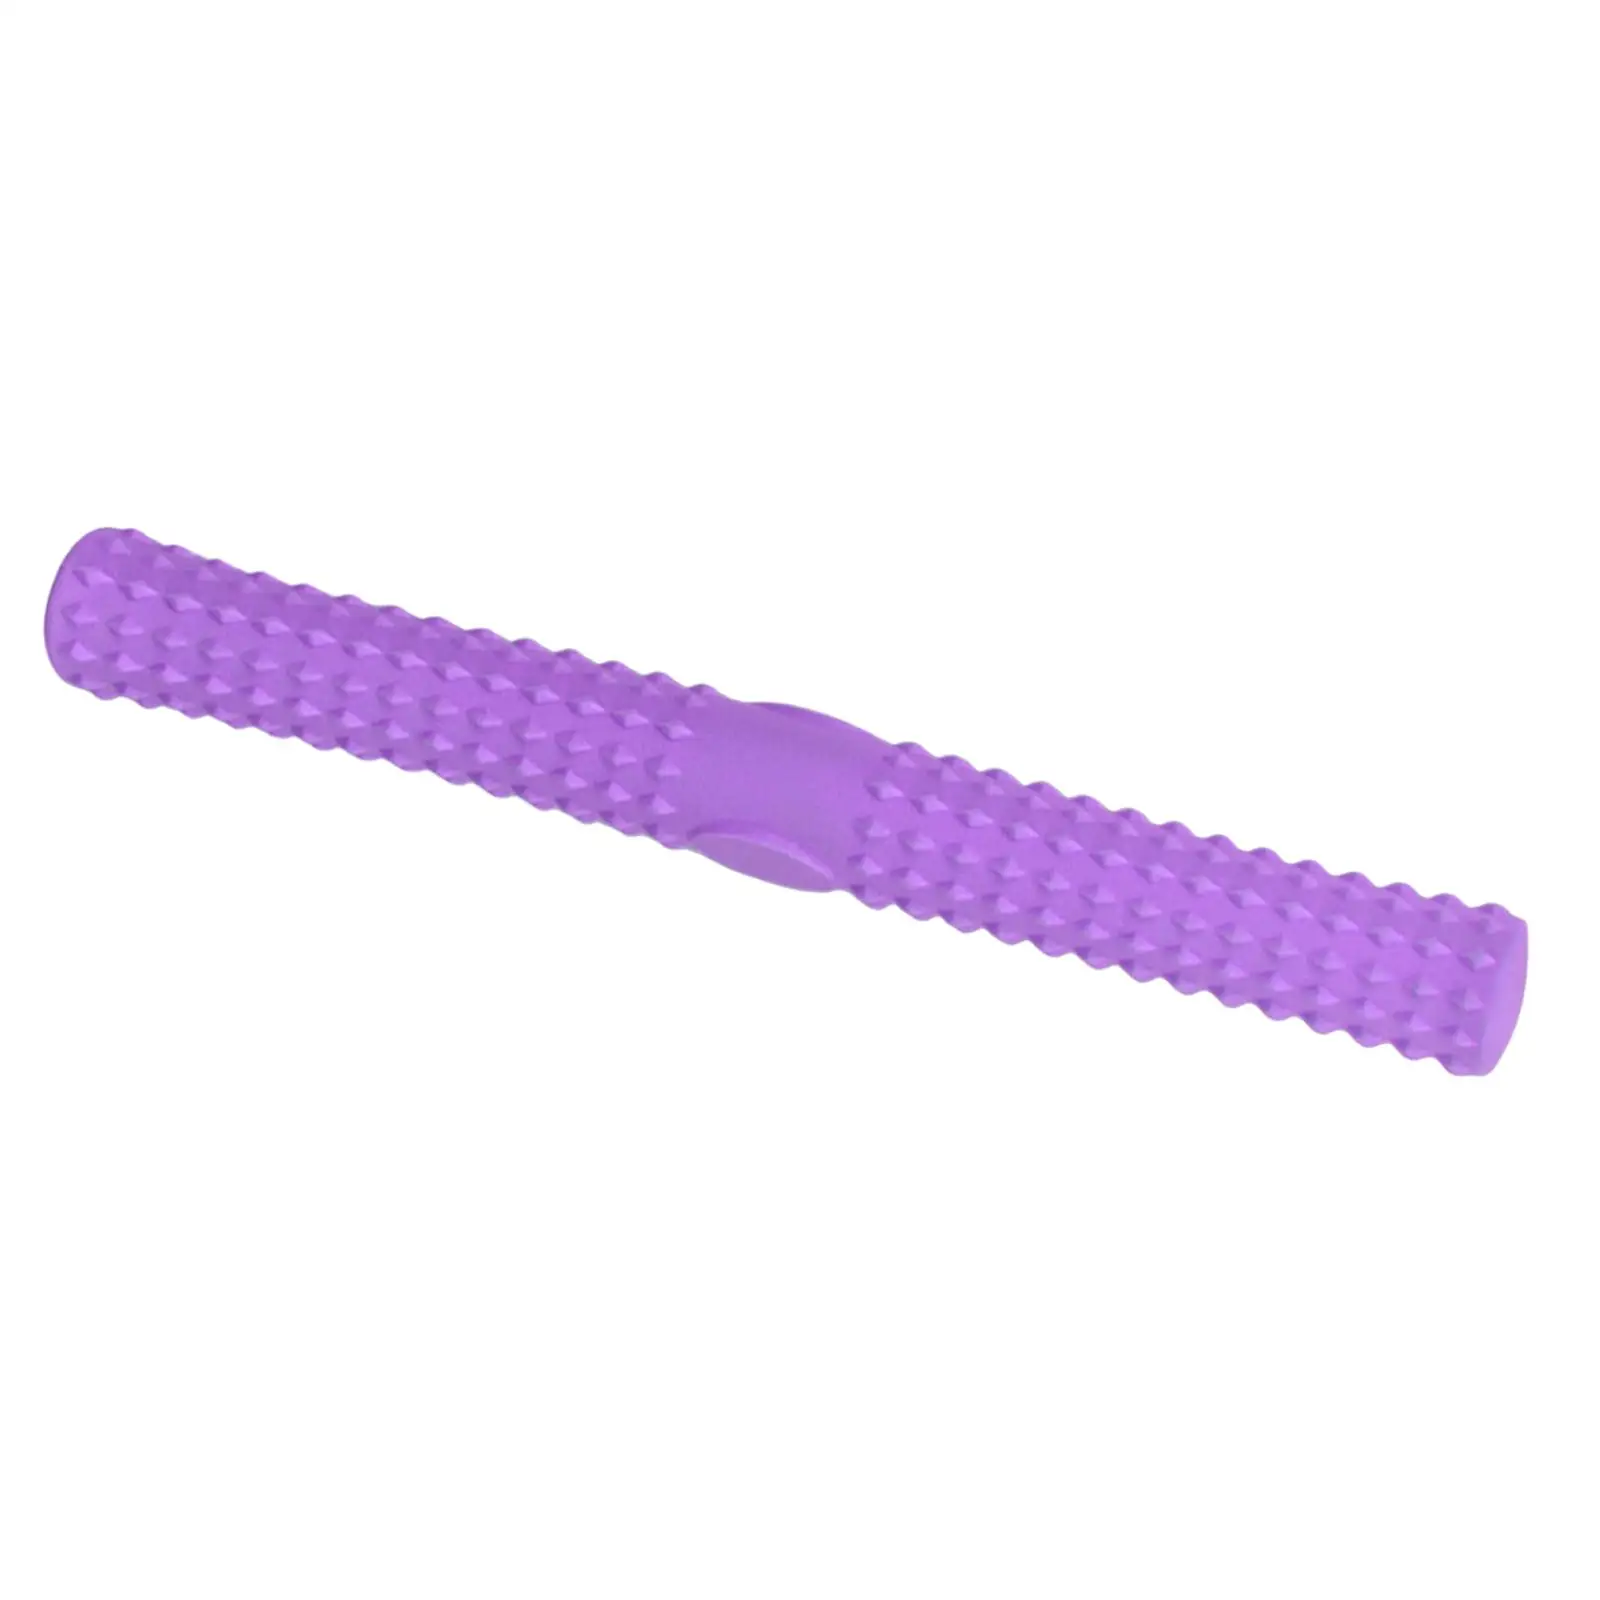 Twist Exerciser Bars Flexible Wrist Strength Workout Massage Point Massage Wand for Legs Full Body Travel Relax Meridian Clap